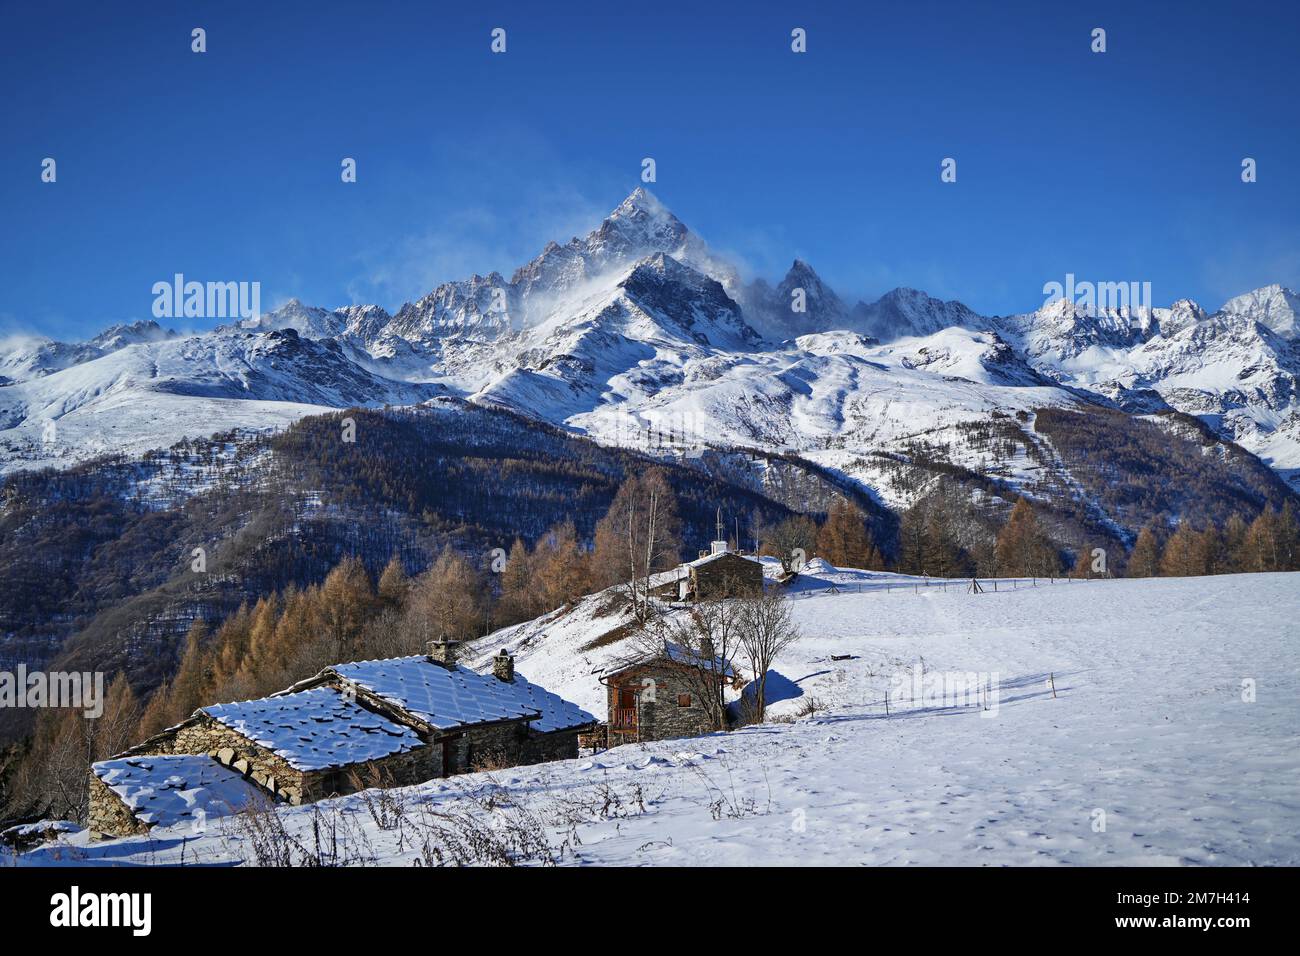 Monviso, 3,842 meters, is the king of the Alps, imposing and majestic in its snowy beauty. A breathtaking view from the village of Ostana in Piedmont, Stock Photo